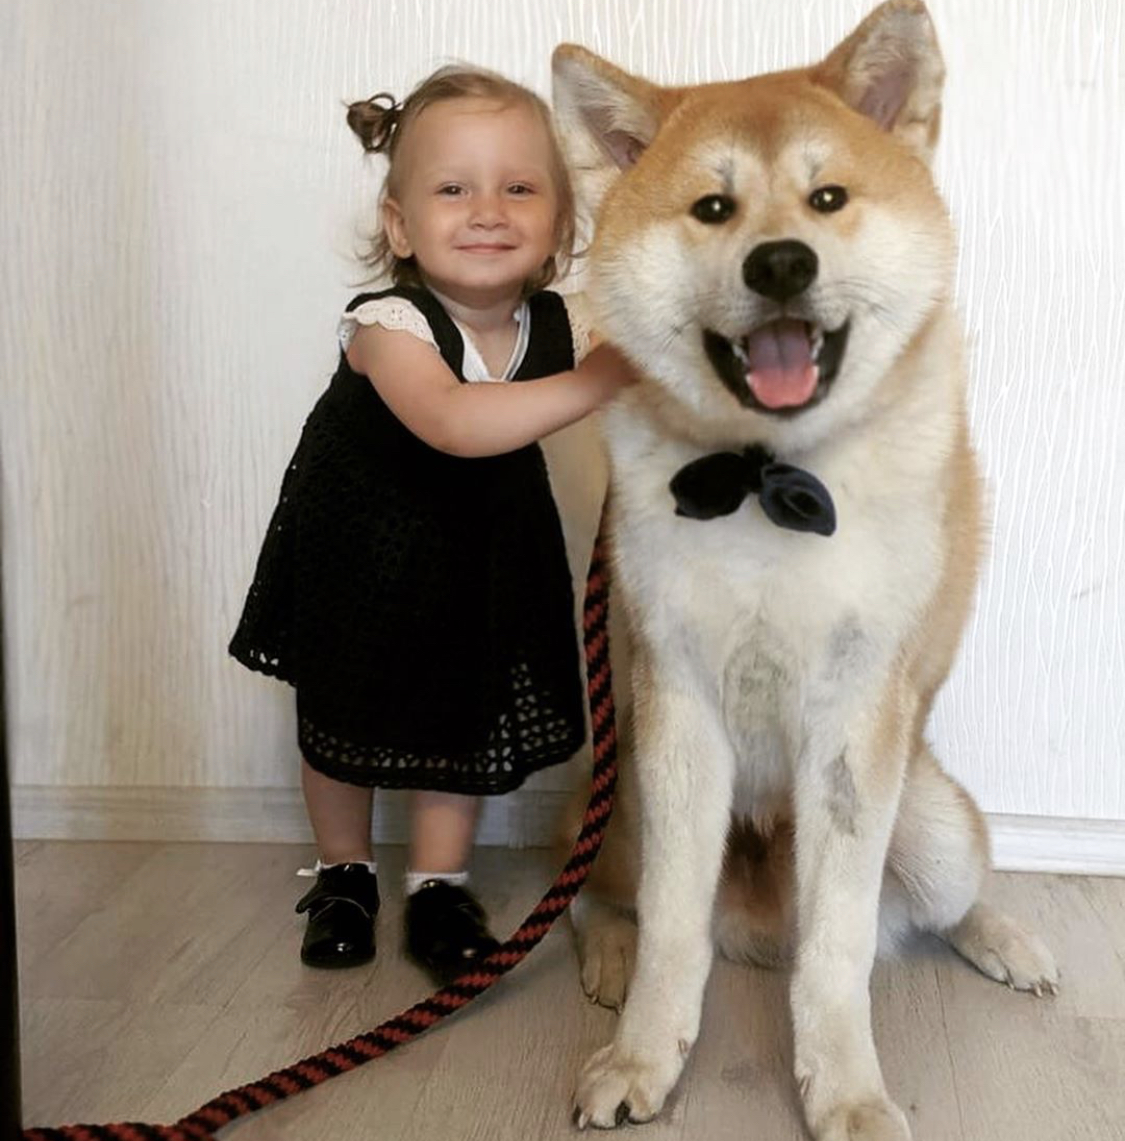 Akita Inu sitting on the floor next to a kid